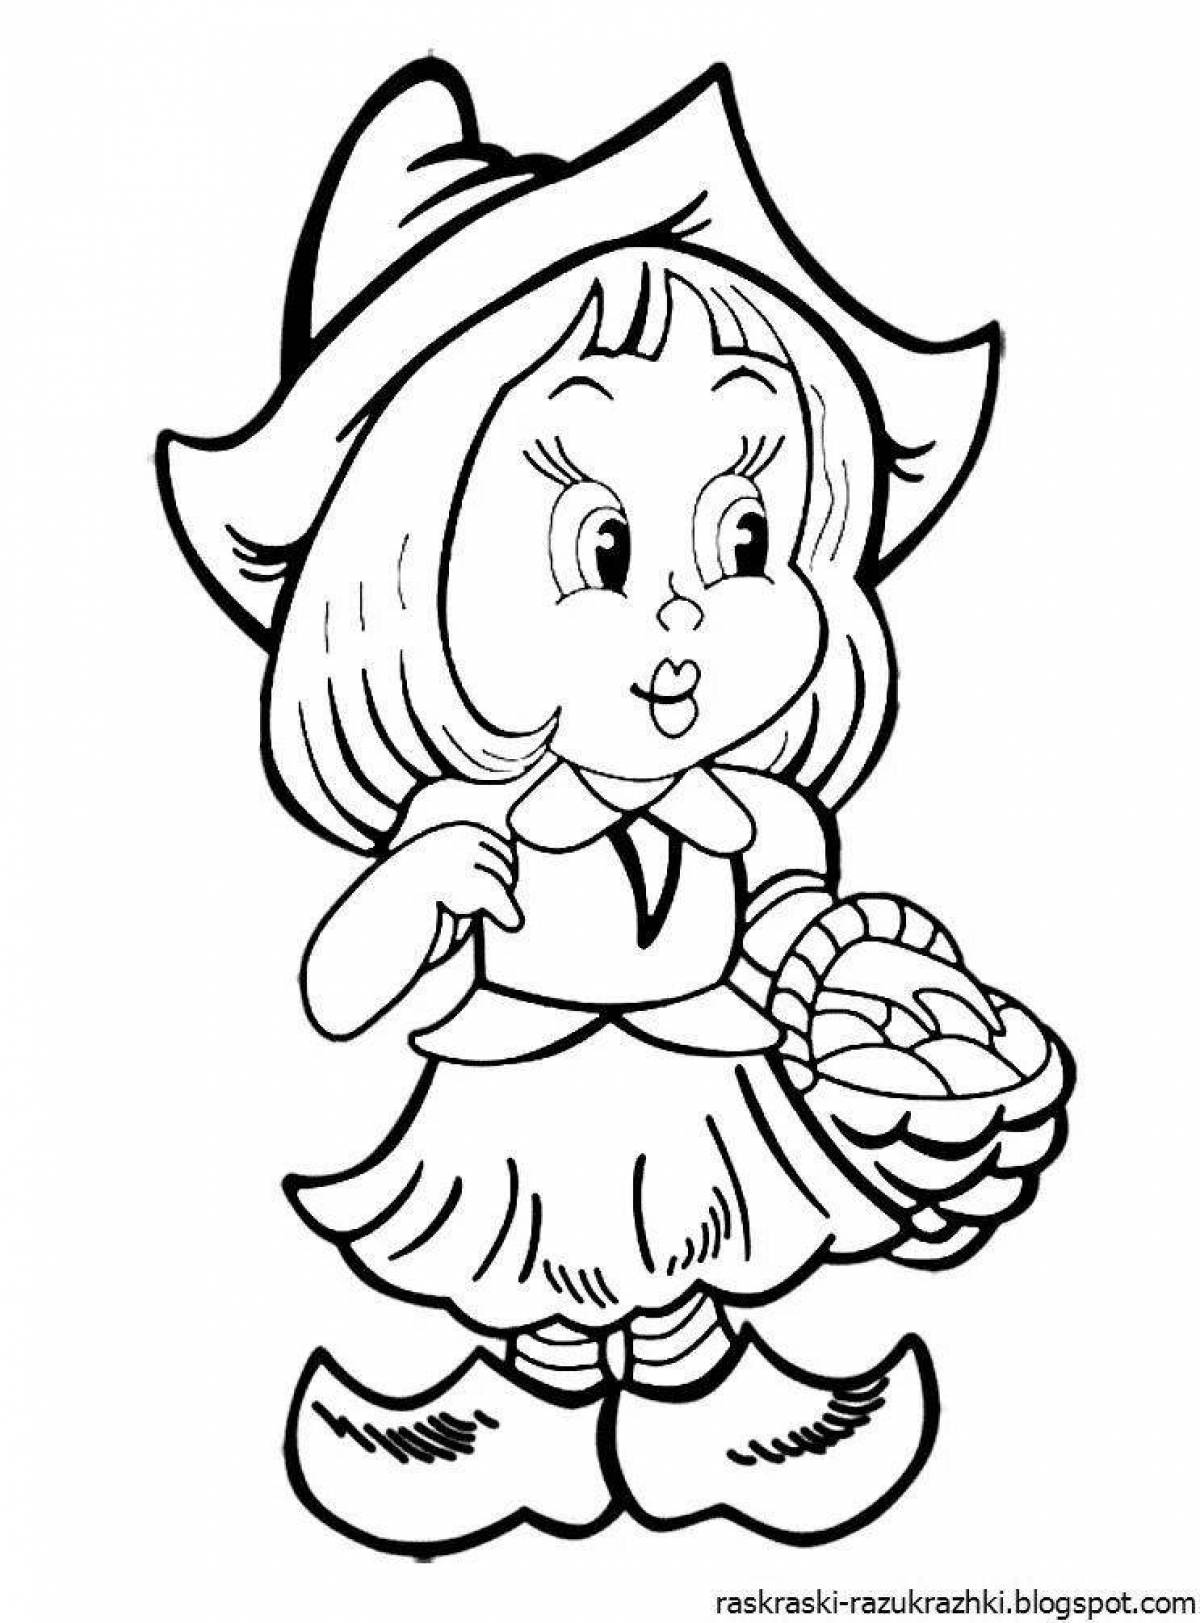 Generous coloring pages heroes of fairy tales for children